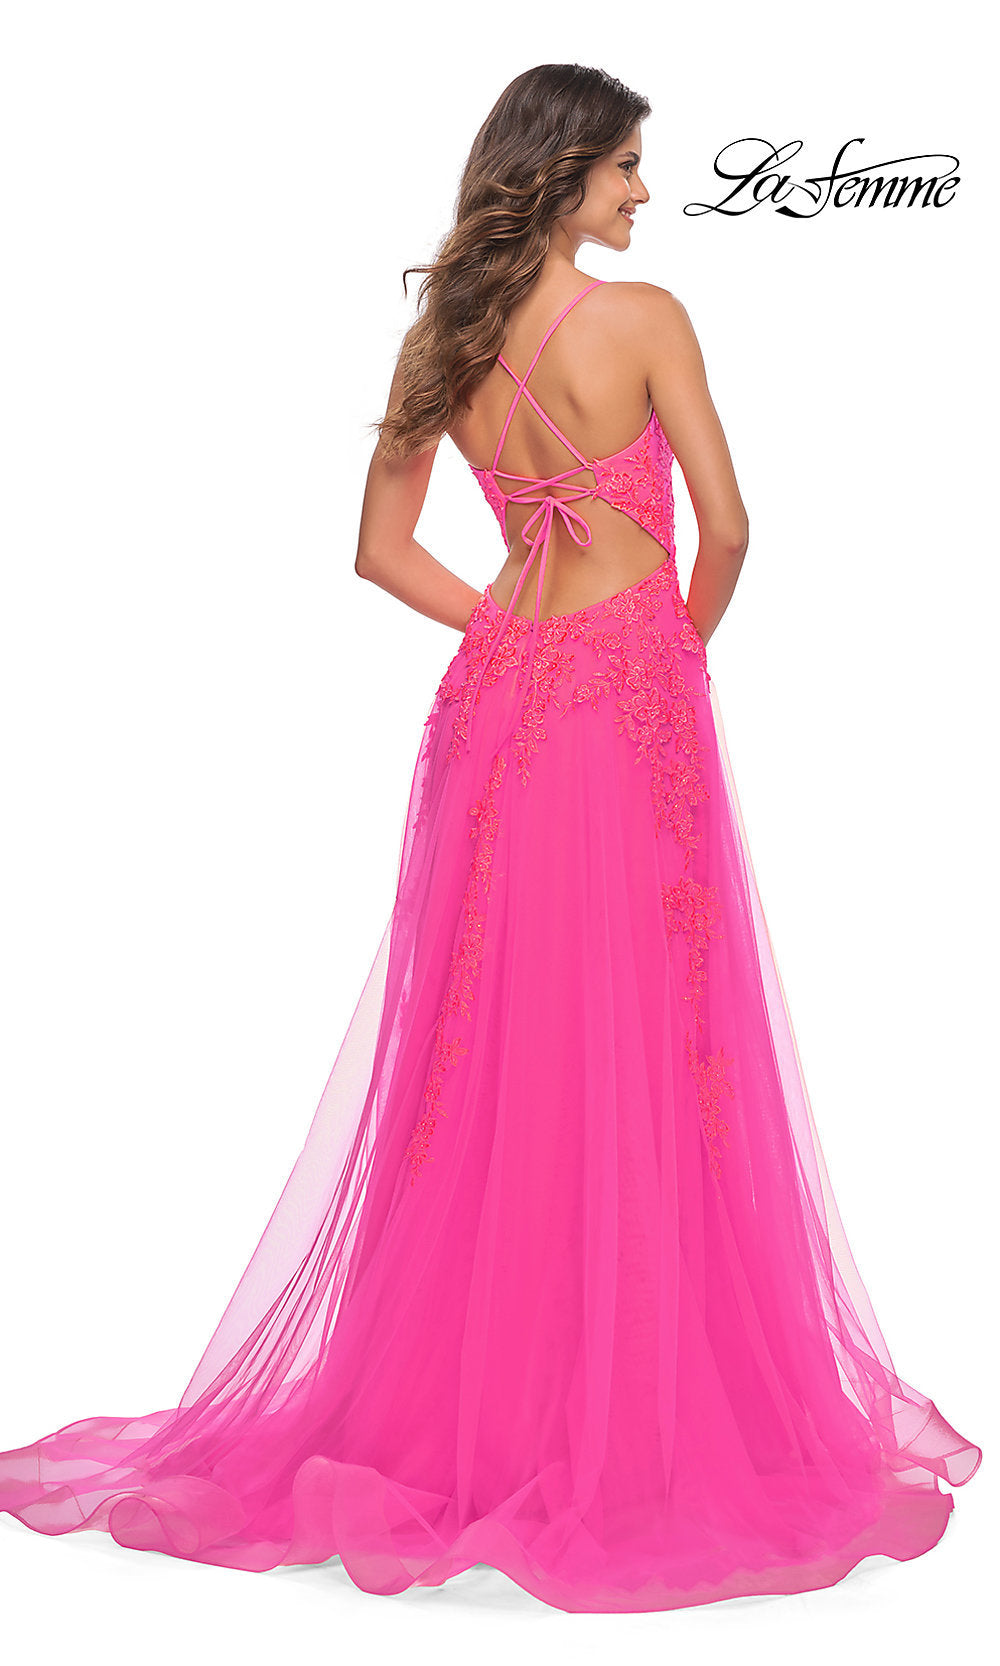 Girls Beautiful long Pink Party Prom style Dress - 170cm / Age Guide 12-14